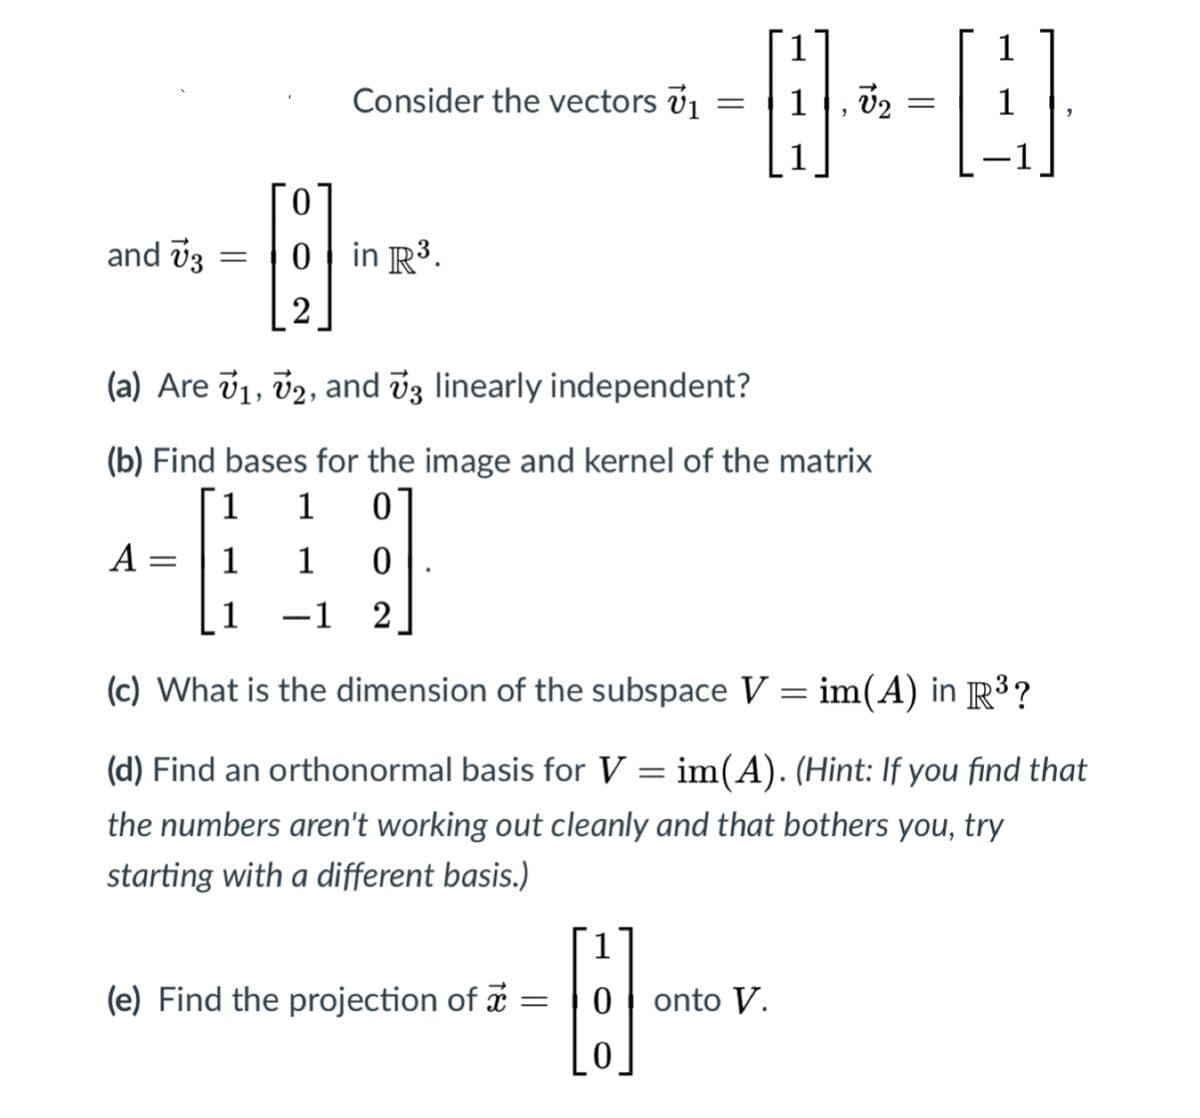 Consider the vectors v1
--
0.
and v3
0 in R3.
2
(a) Are v1, v2, and v3 linearly independent?
(b) Find bases for the image and kernel of the matrix
1
1
A =
1
1
1
-1 2
|
(c) What is the dimension of the subspace V = im(A) in R³?
(d) Find an orthonormal basis for V = im(A). (Hint: If you find that
the numbers aren't working out cleanly and that bothers you, try
starting with a different basis.)
(e) Find the projection of =
onto V.
